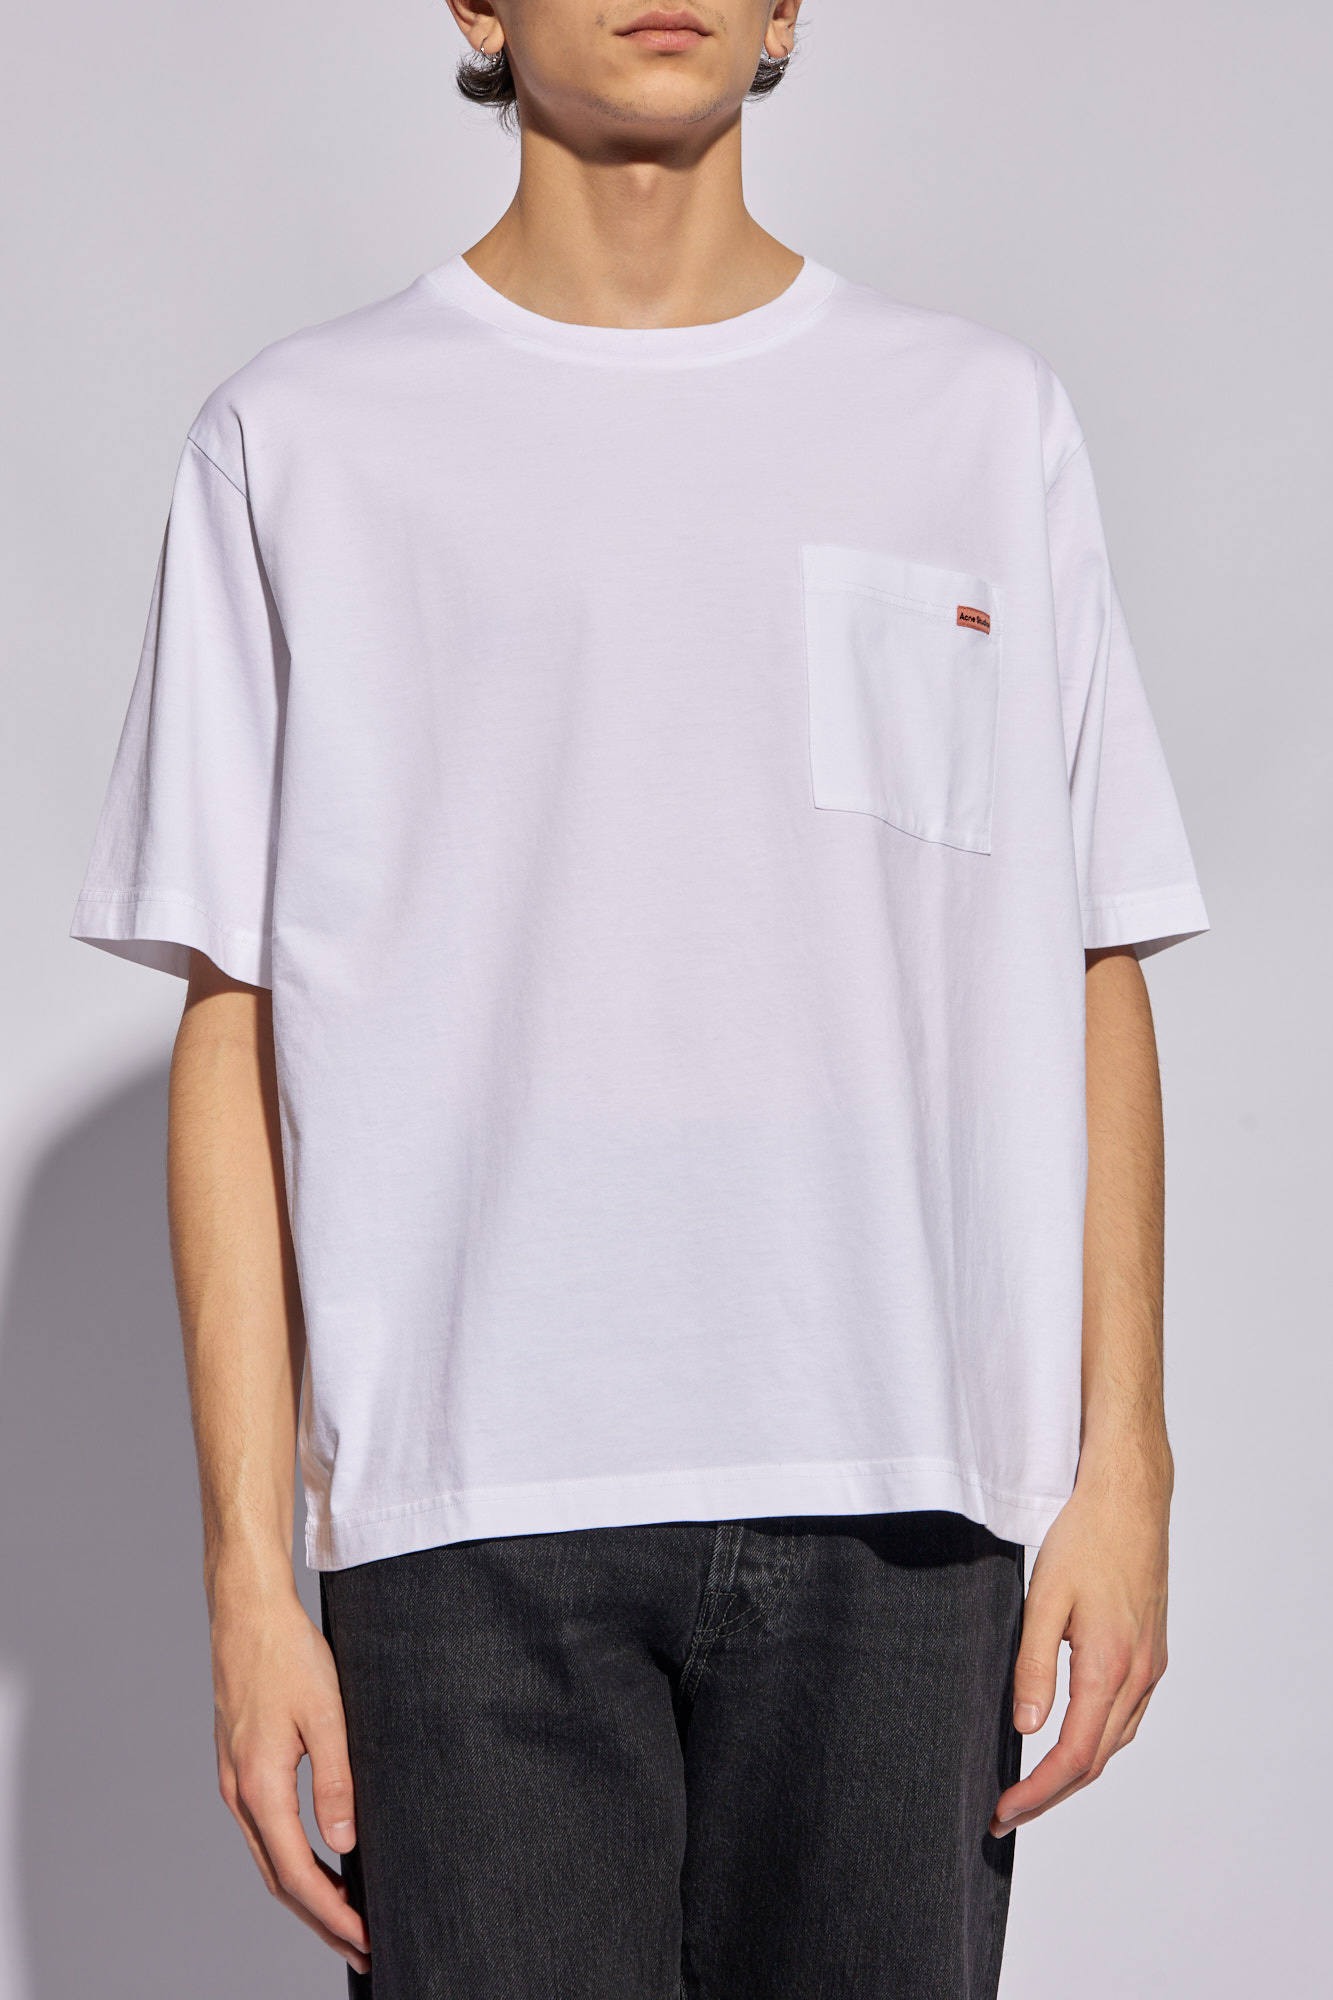 Acne Studios embroidered birds T-shirt